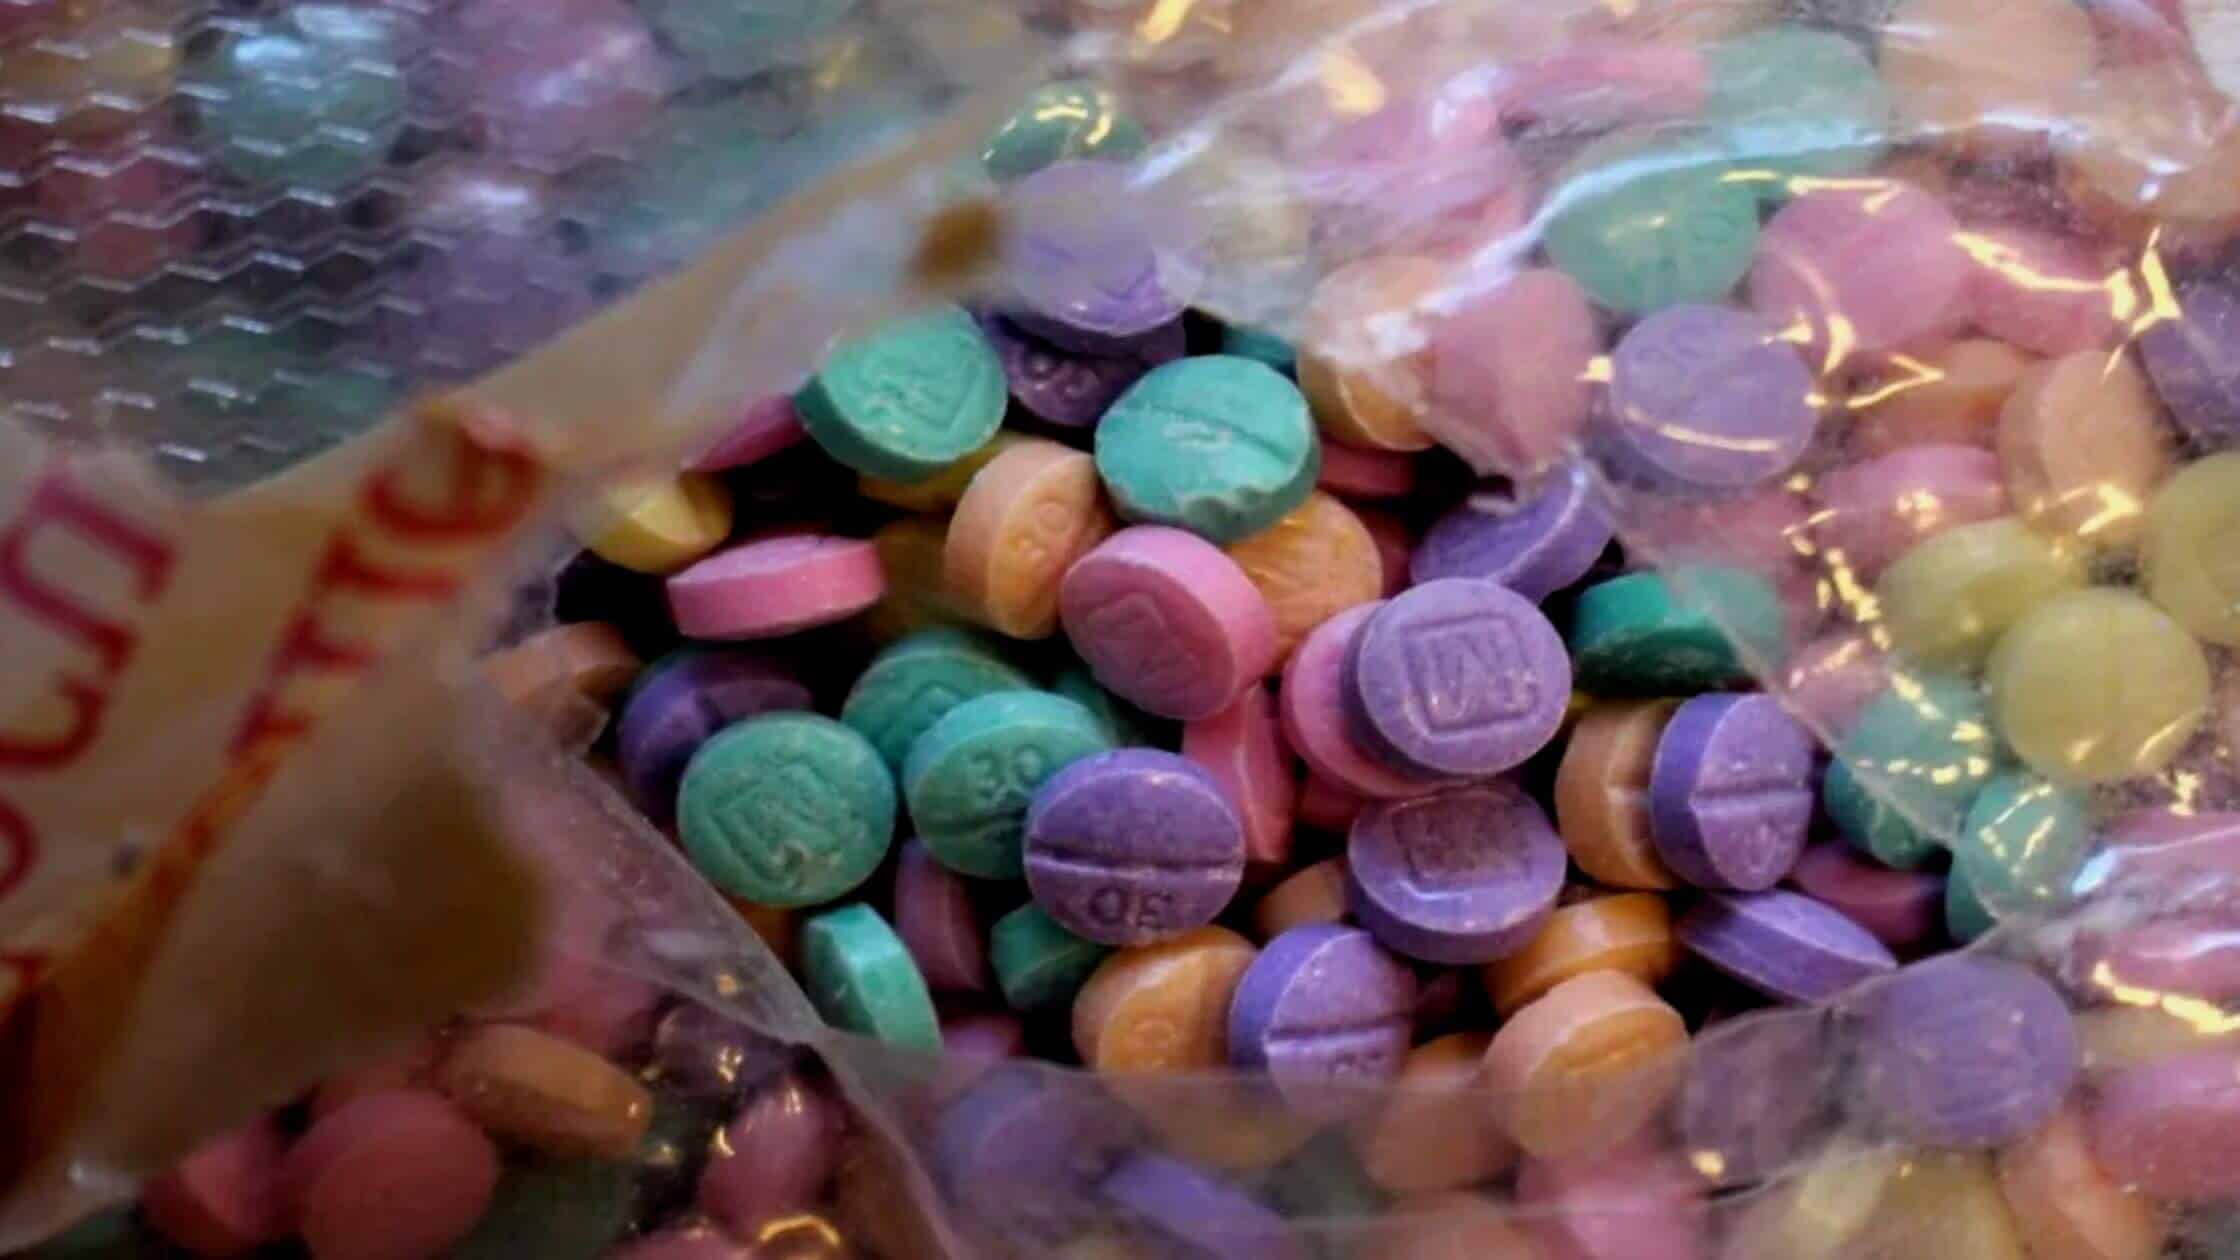 Drug Rainbow Fentanyl - DEA Warns Of This Pills That Look Like Candy